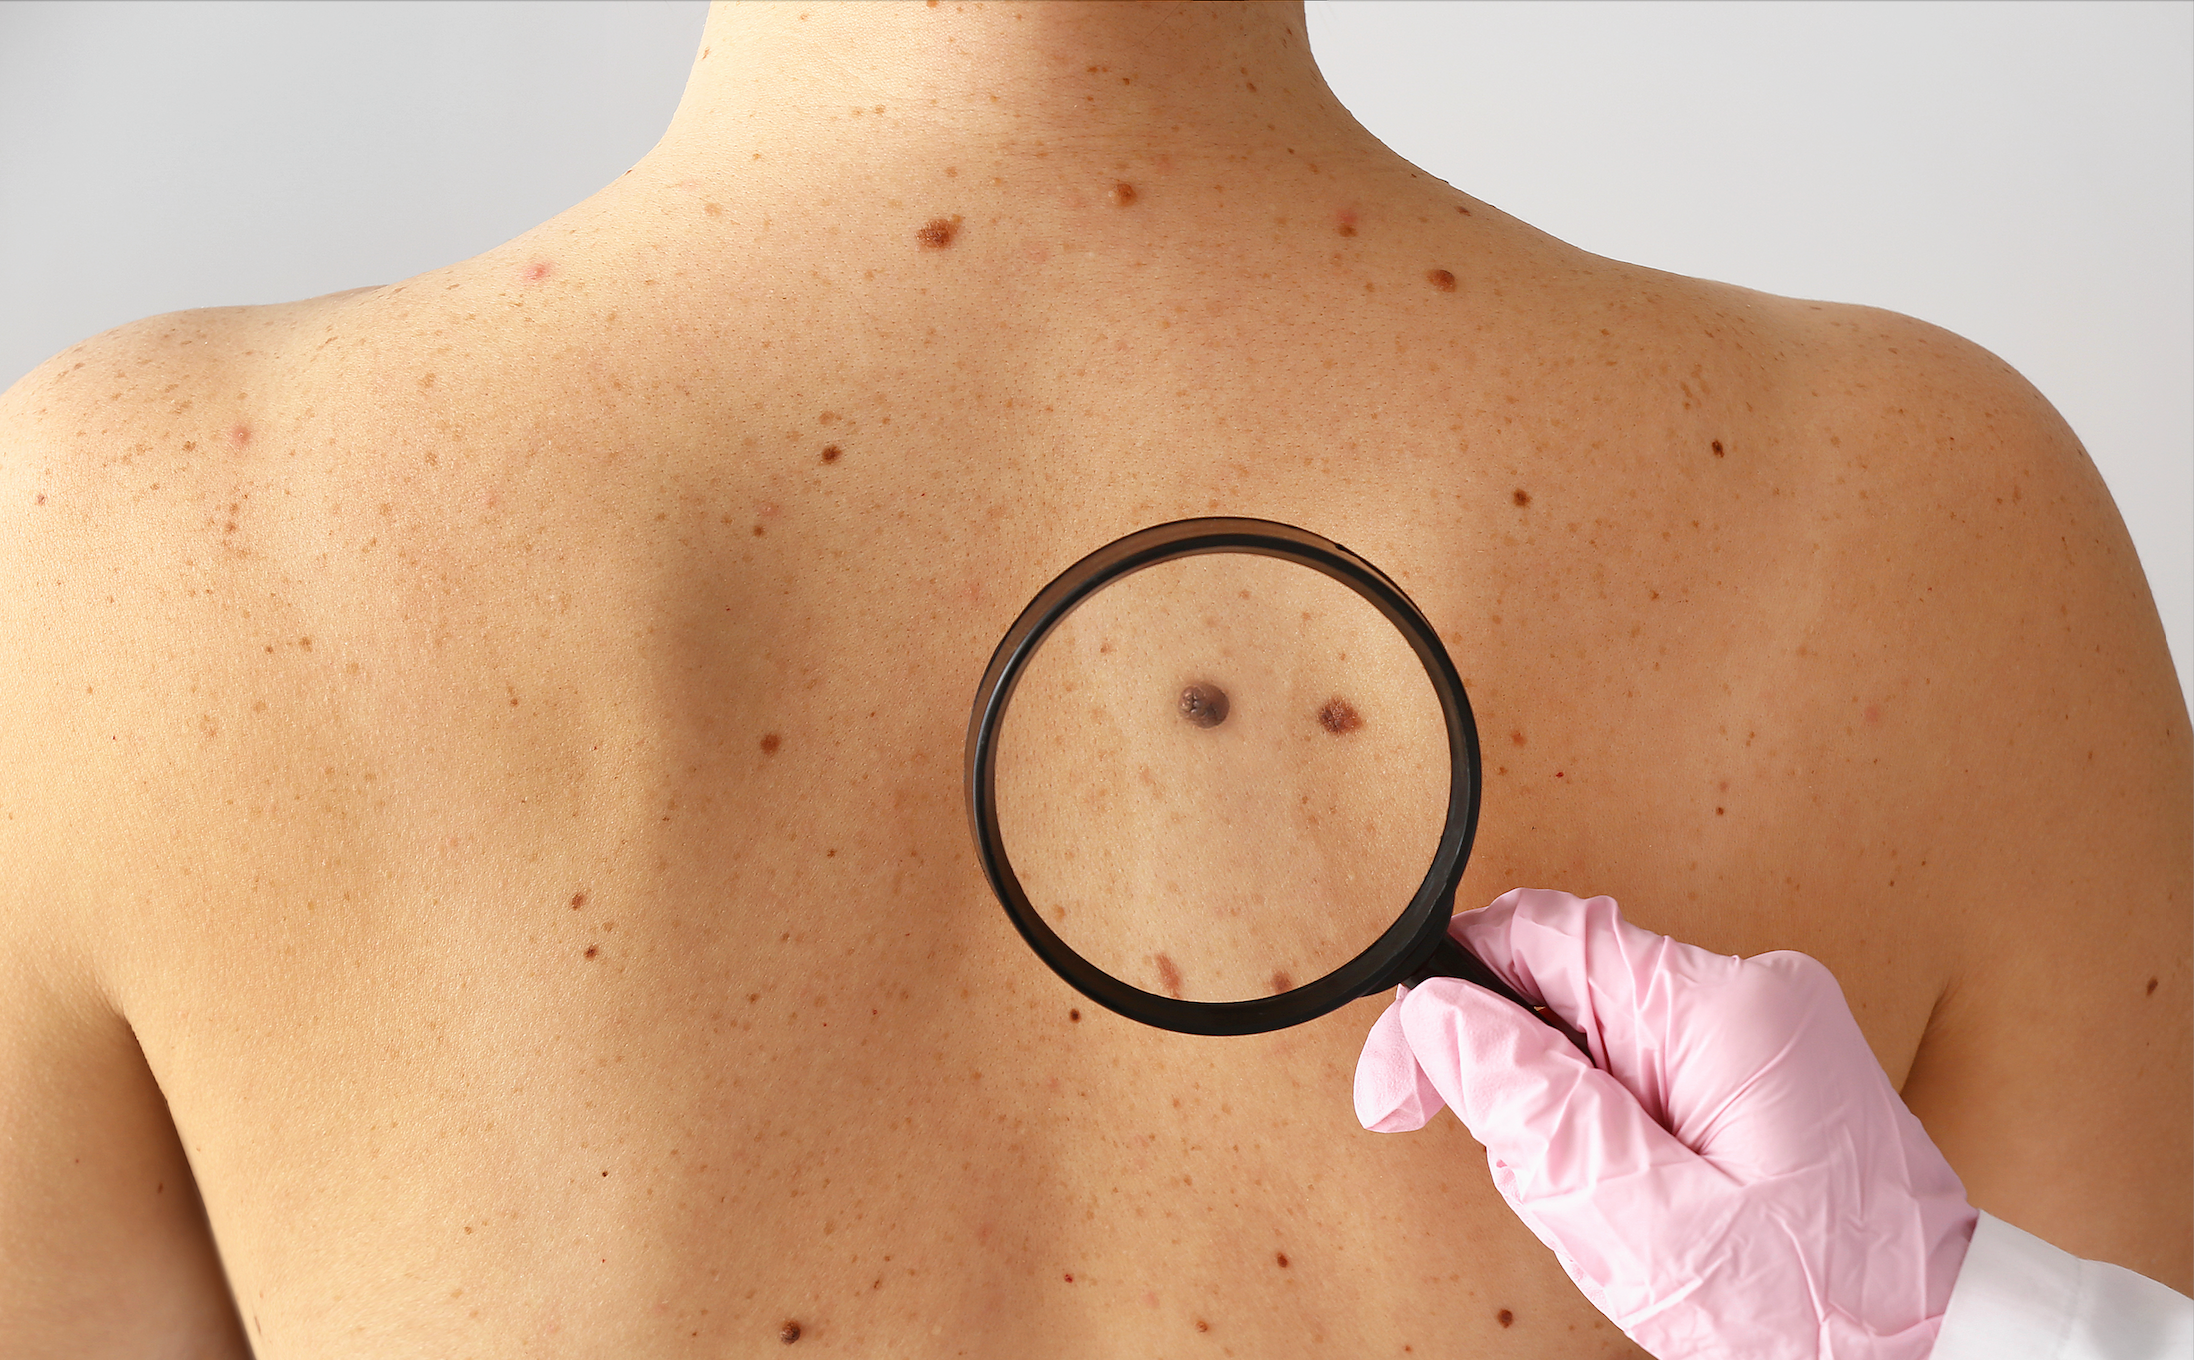 How Is Skin Cancer Treated?